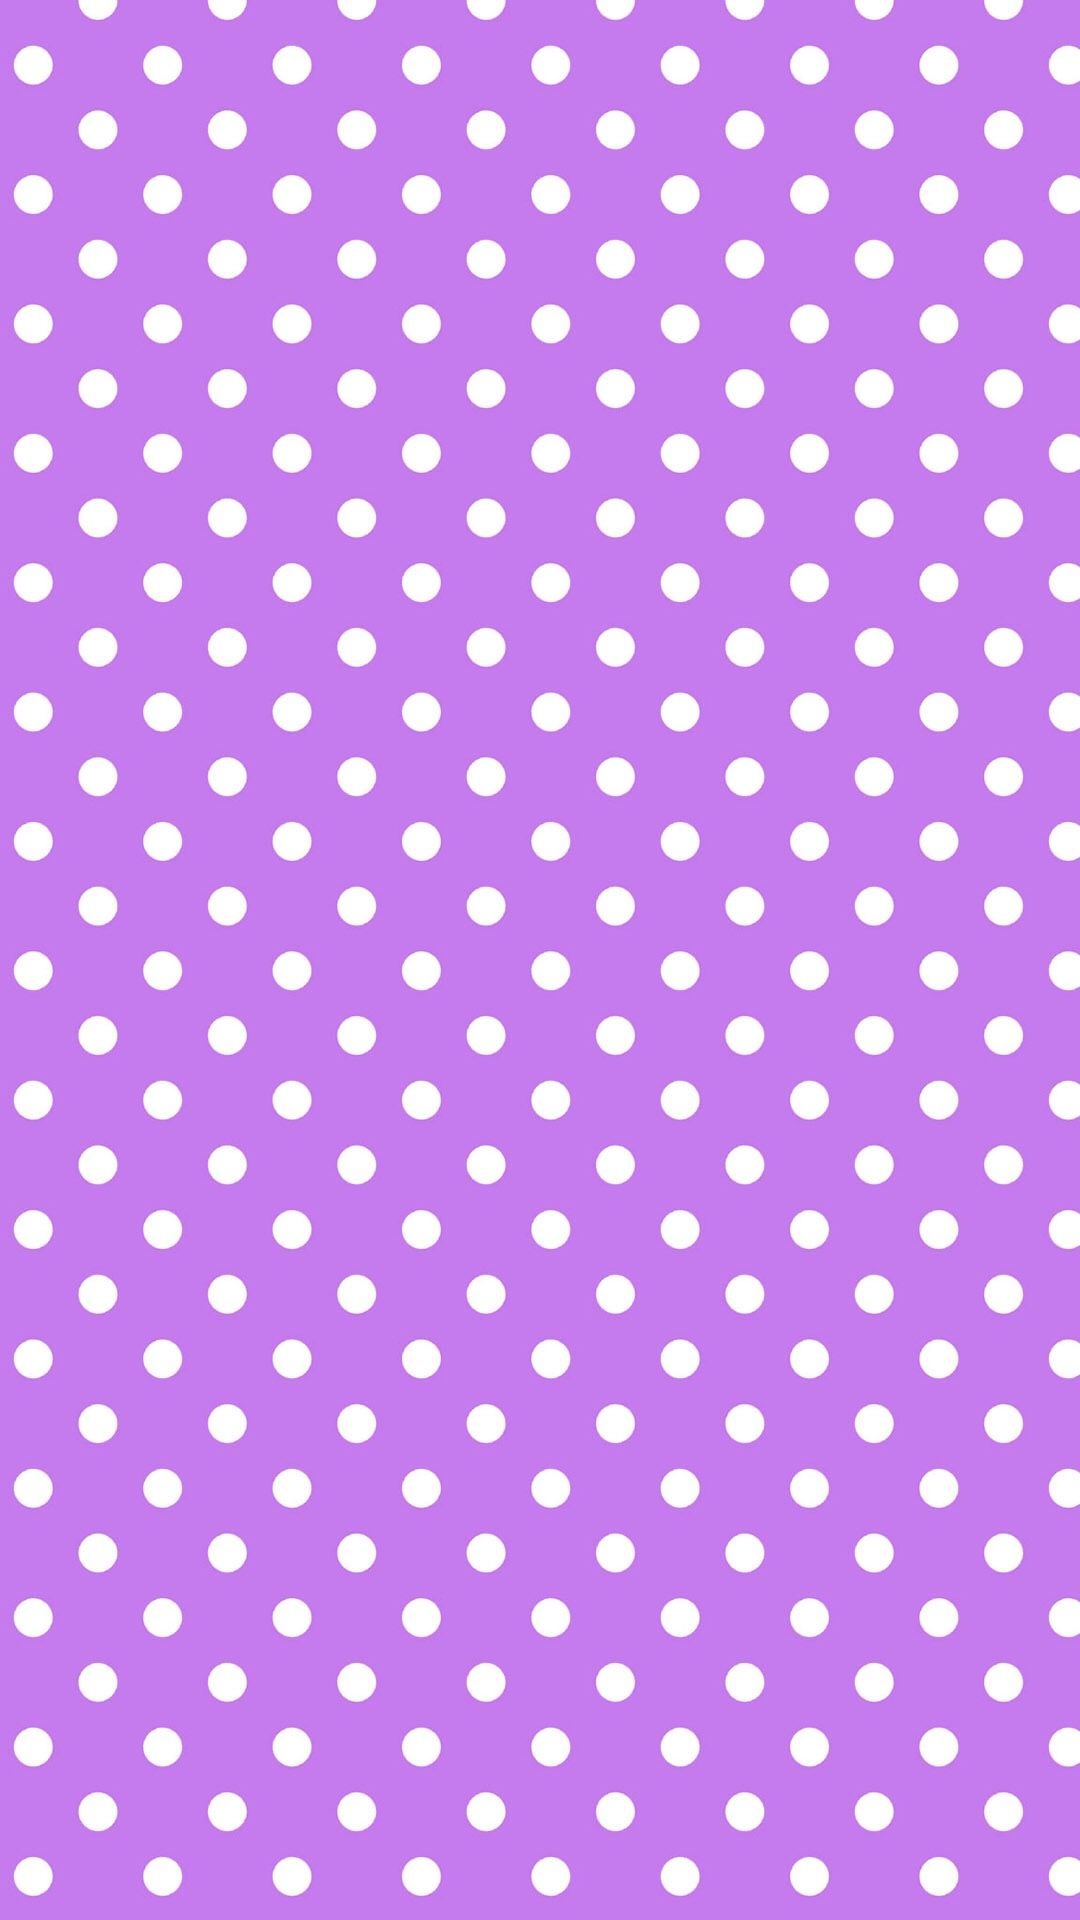 Polka Dot, Purple accents, Luxurious and regal, Rich and vibrant, 1080x1920 Full HD Handy